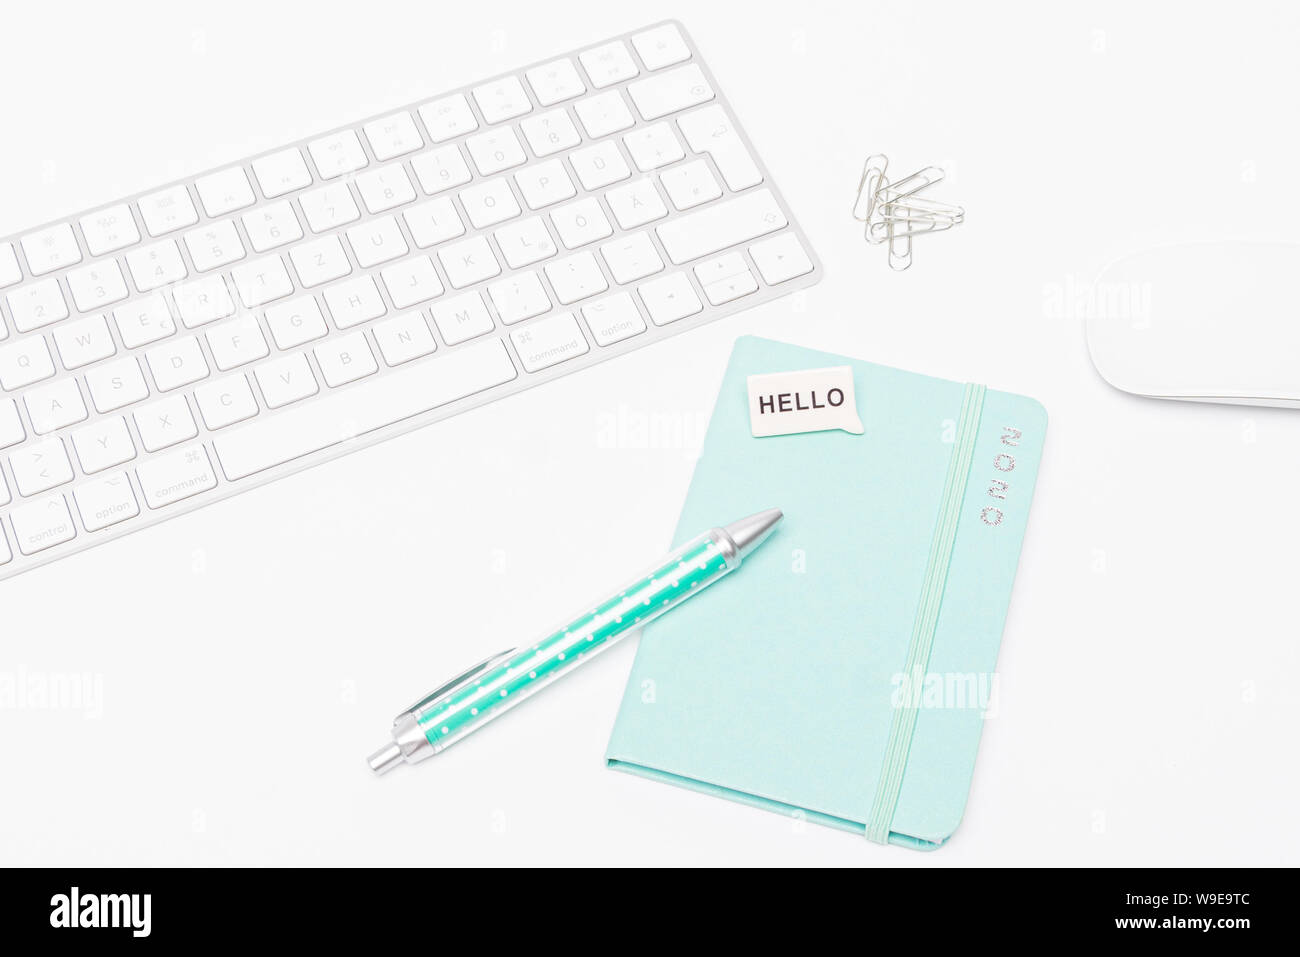 Desk with keyboard and mouse, calendar 2020 and a pen. Stock Photo